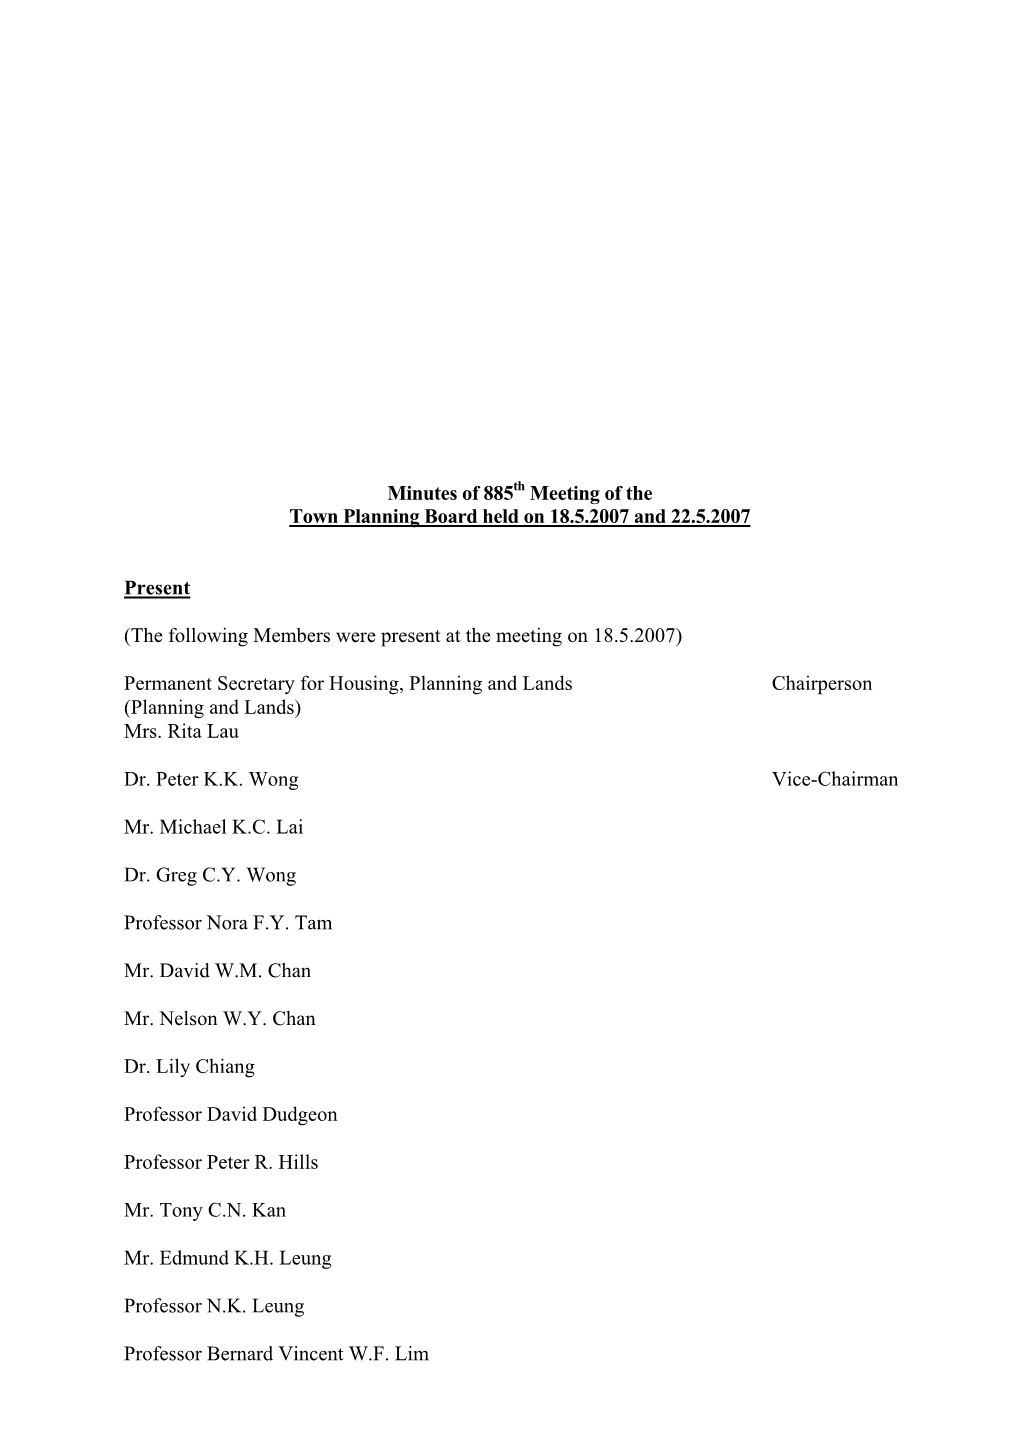 Minutes of 885 Meeting of the Town Planning Board Held on 18.5.2007 and 22.5.2007 Present